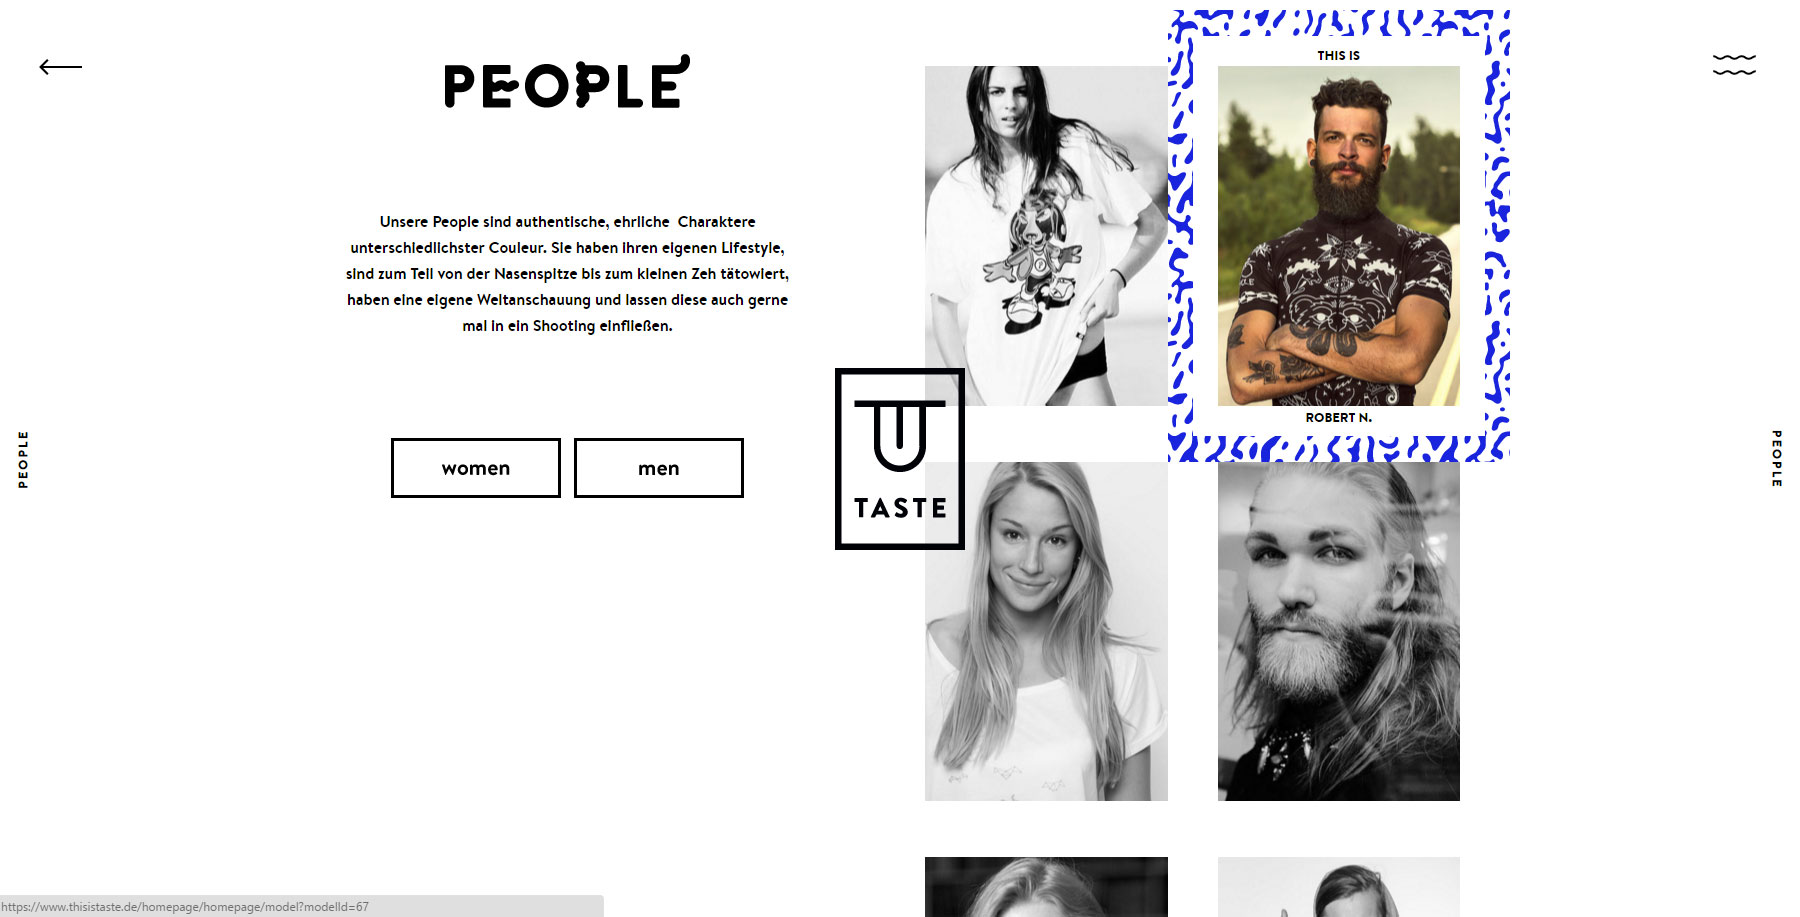 TASTE – Iconic People - Website of the Day